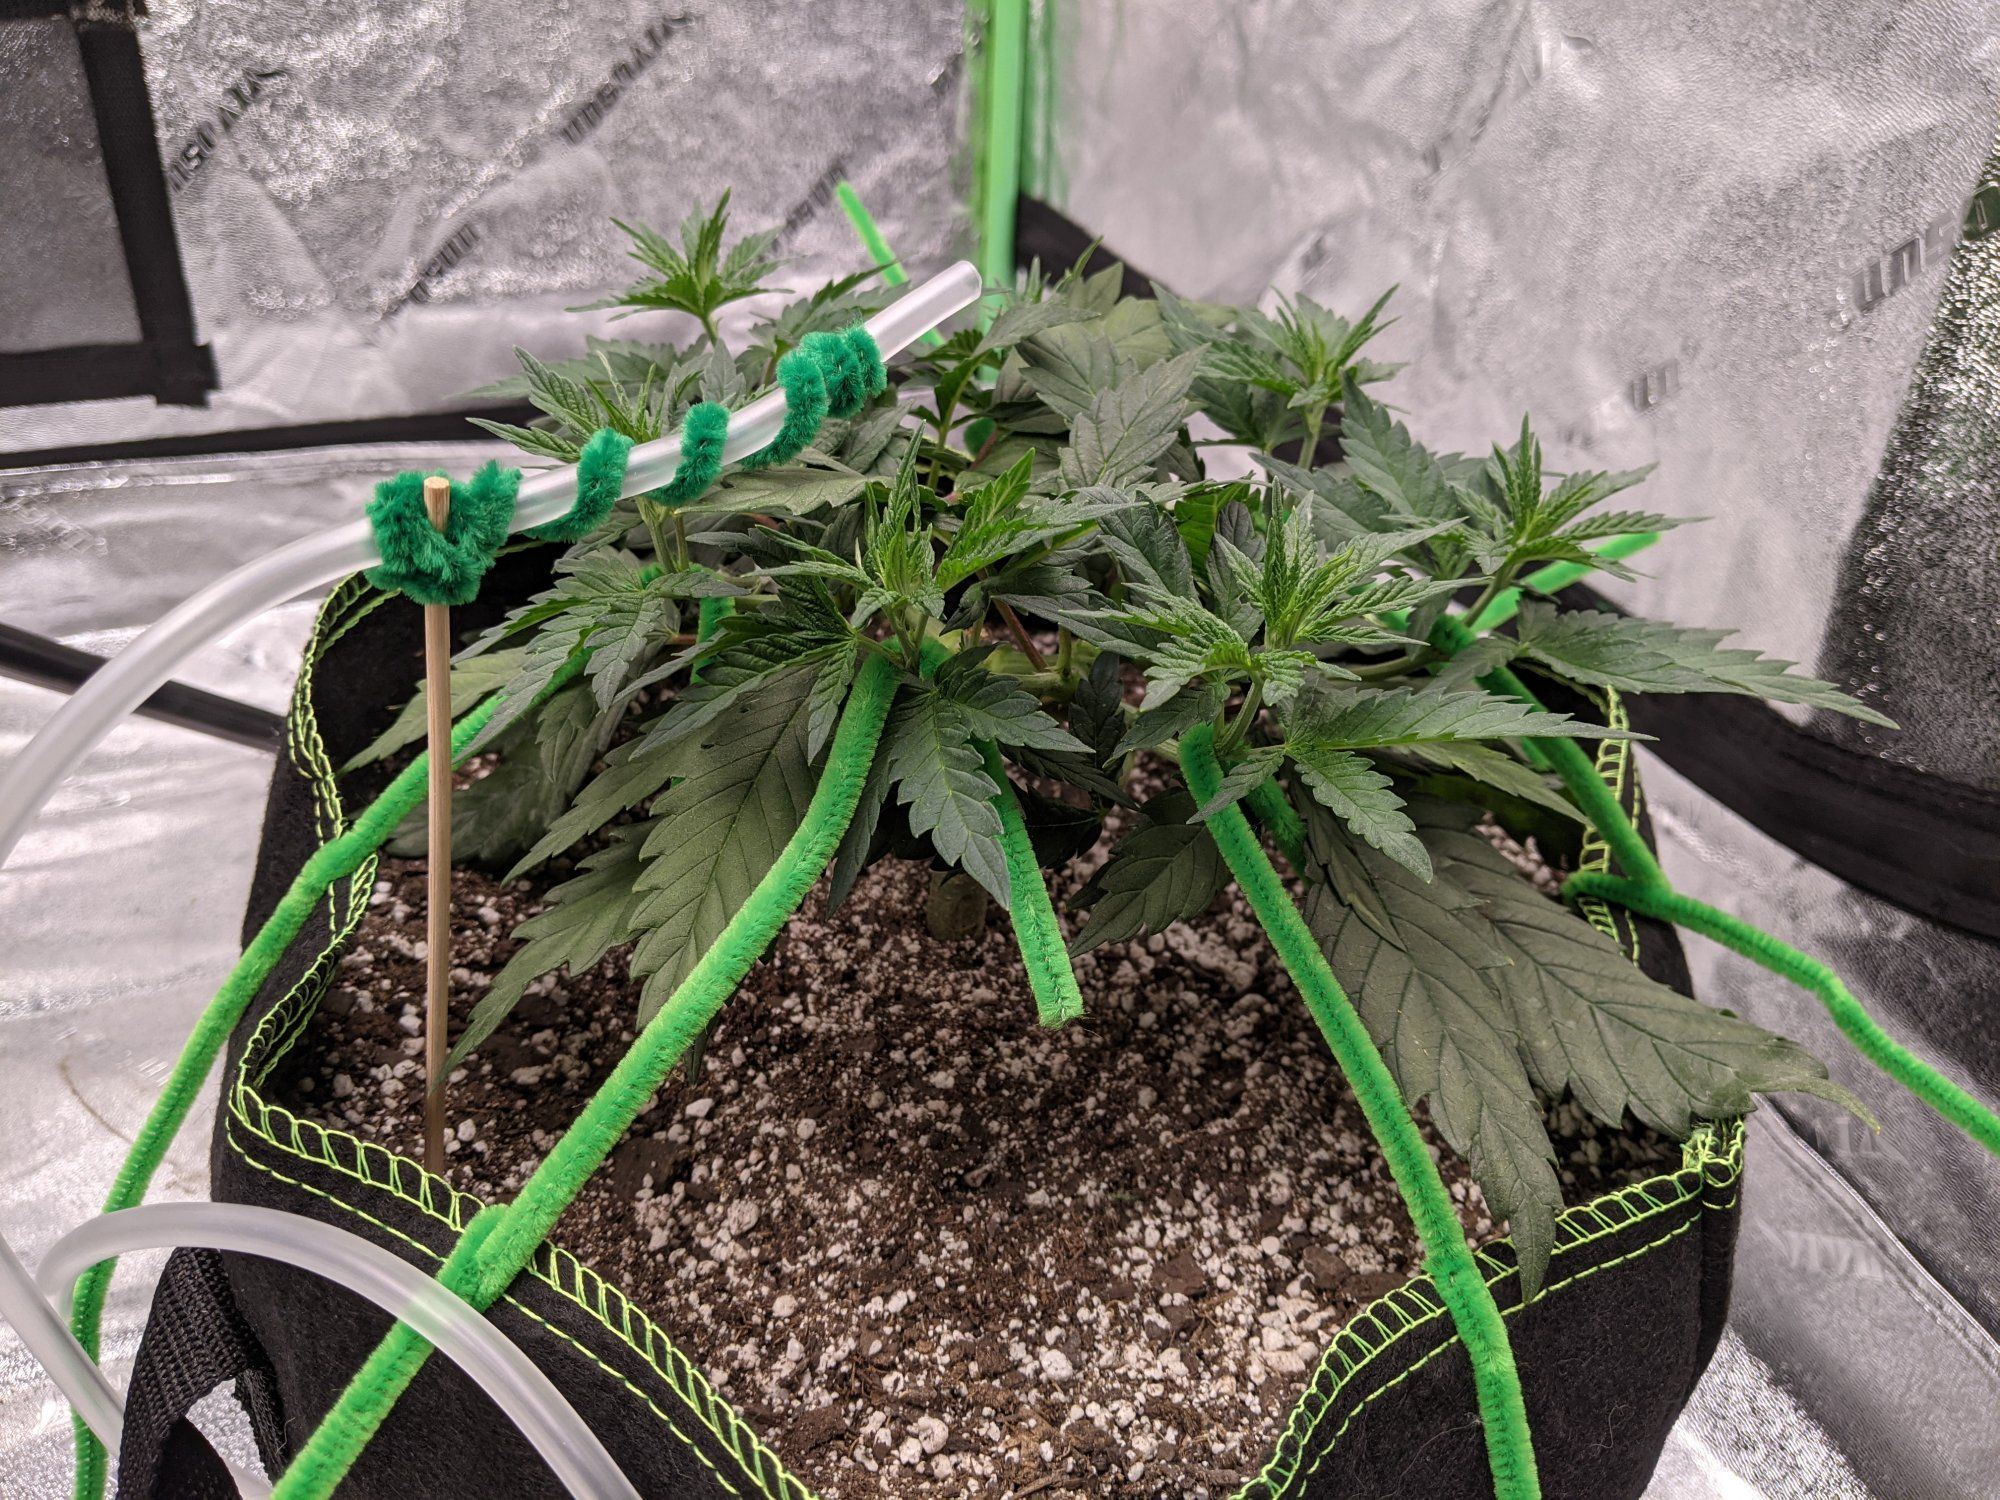 Mainlining 2 plants in a 4x4 ft tent how many tops 2